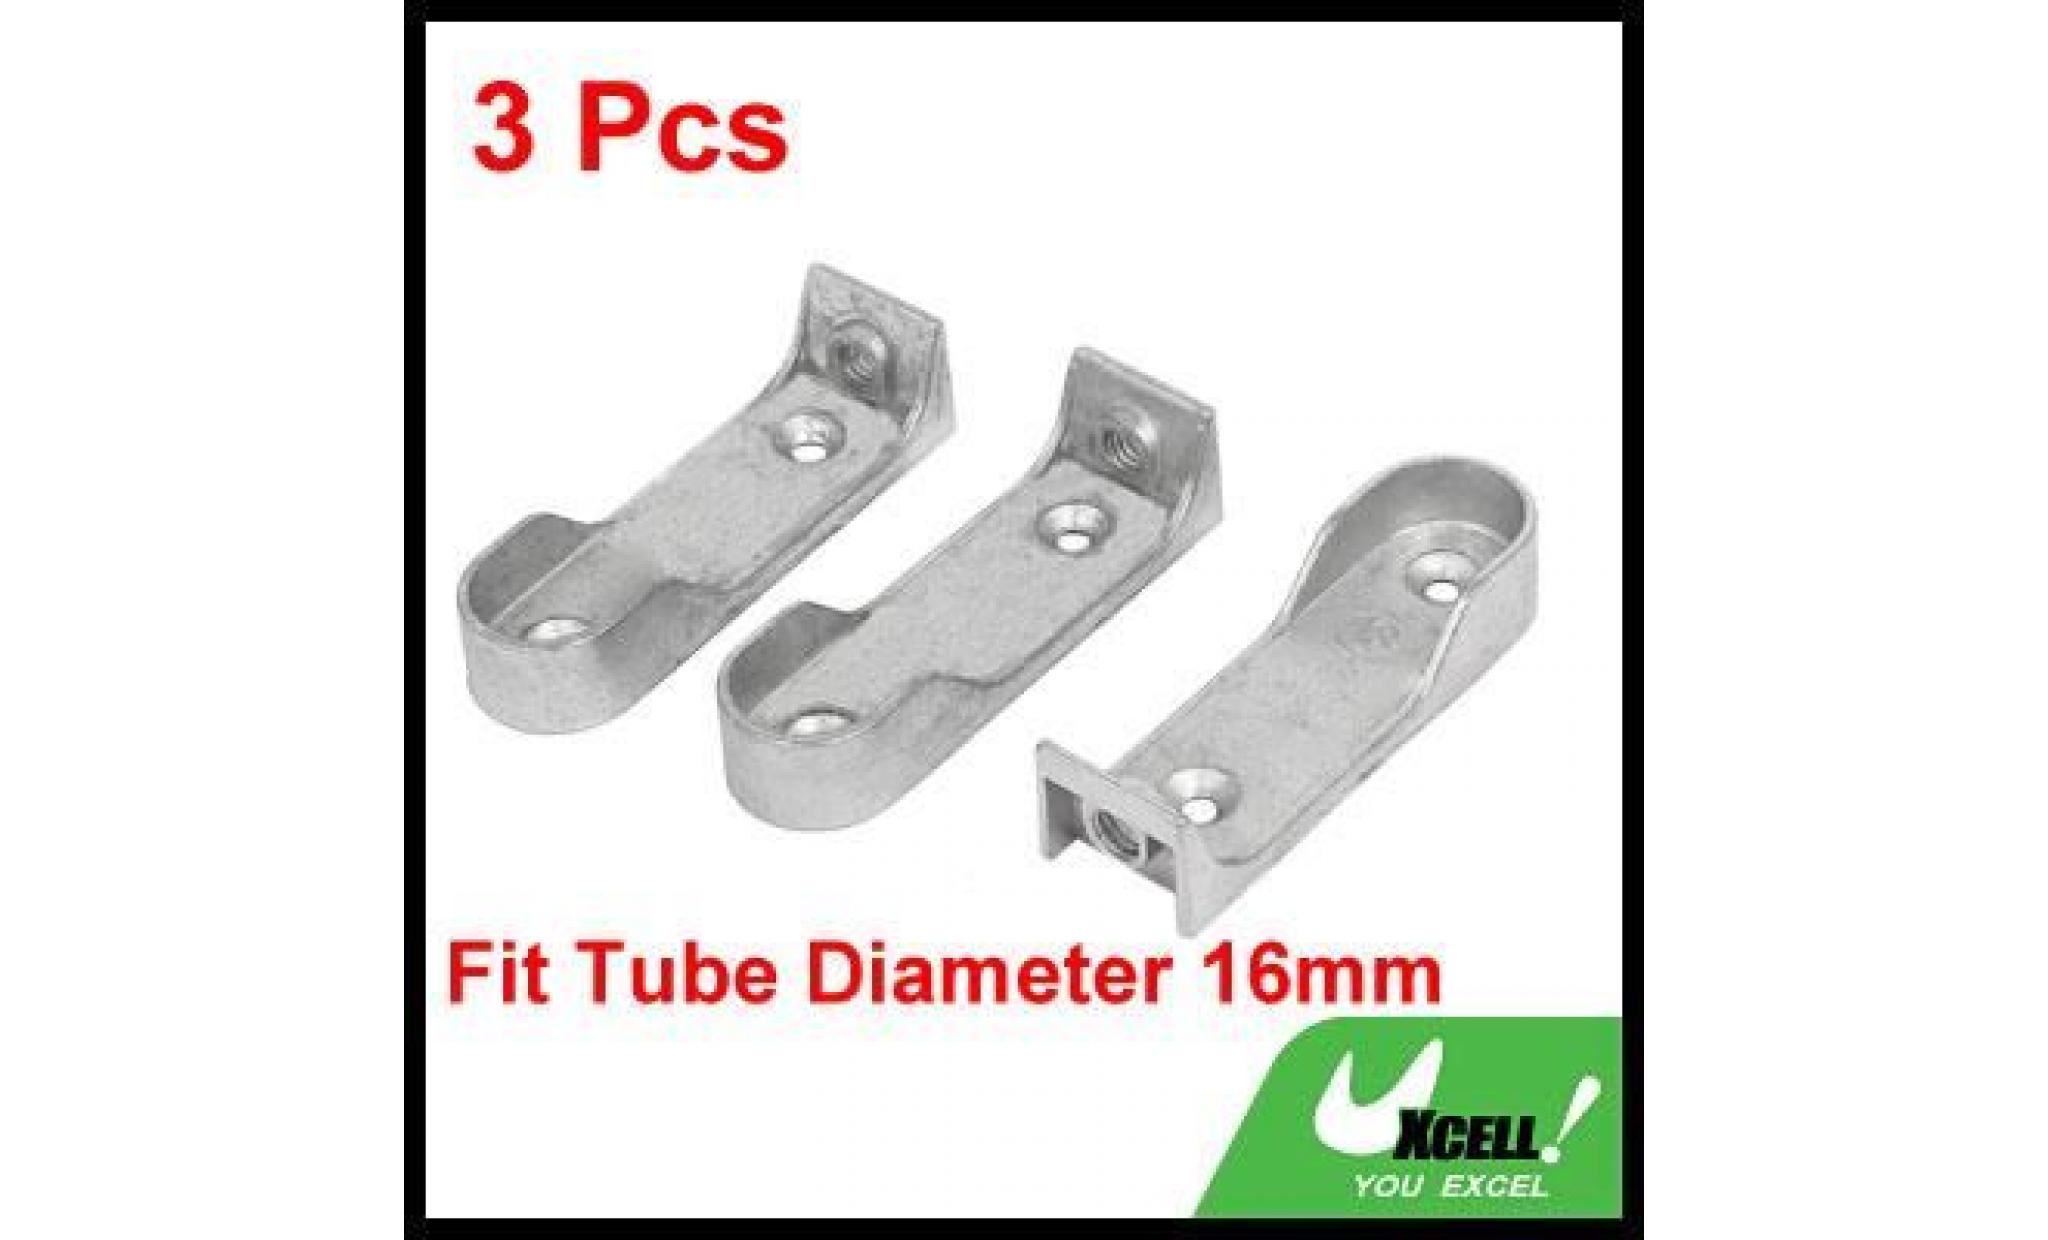 wardrobe rod end rail supports brackets holder silver tone 3pcs for 16mm tube pas cher